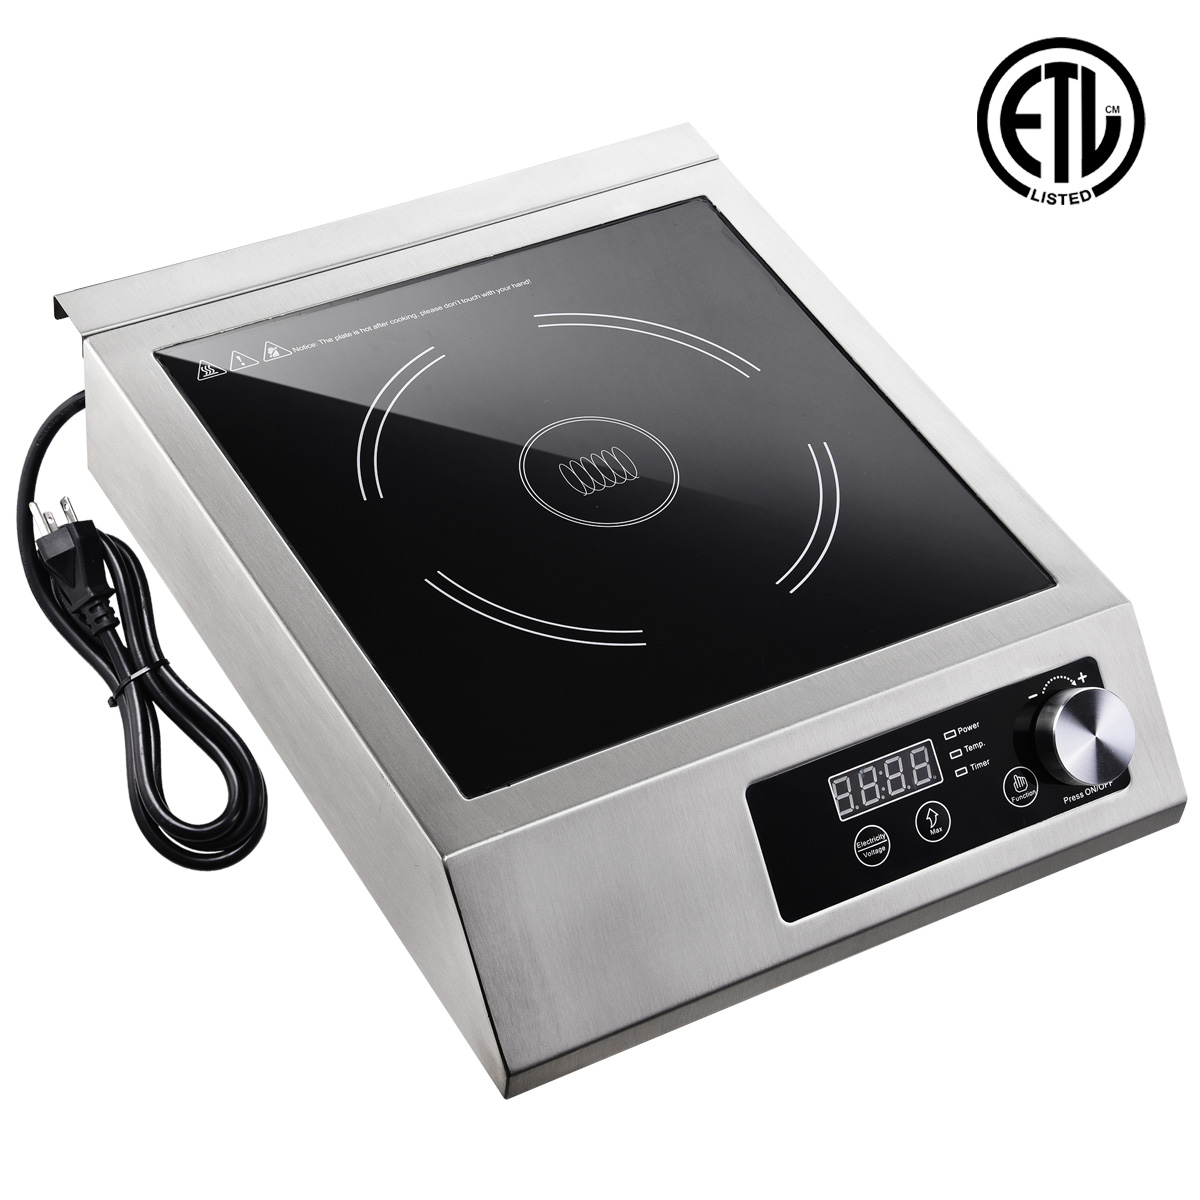 Yescom 3500W Commercial Induction Cooktop Electric Stove Burner Rapid Heating Stainless Steel with ETL Certification